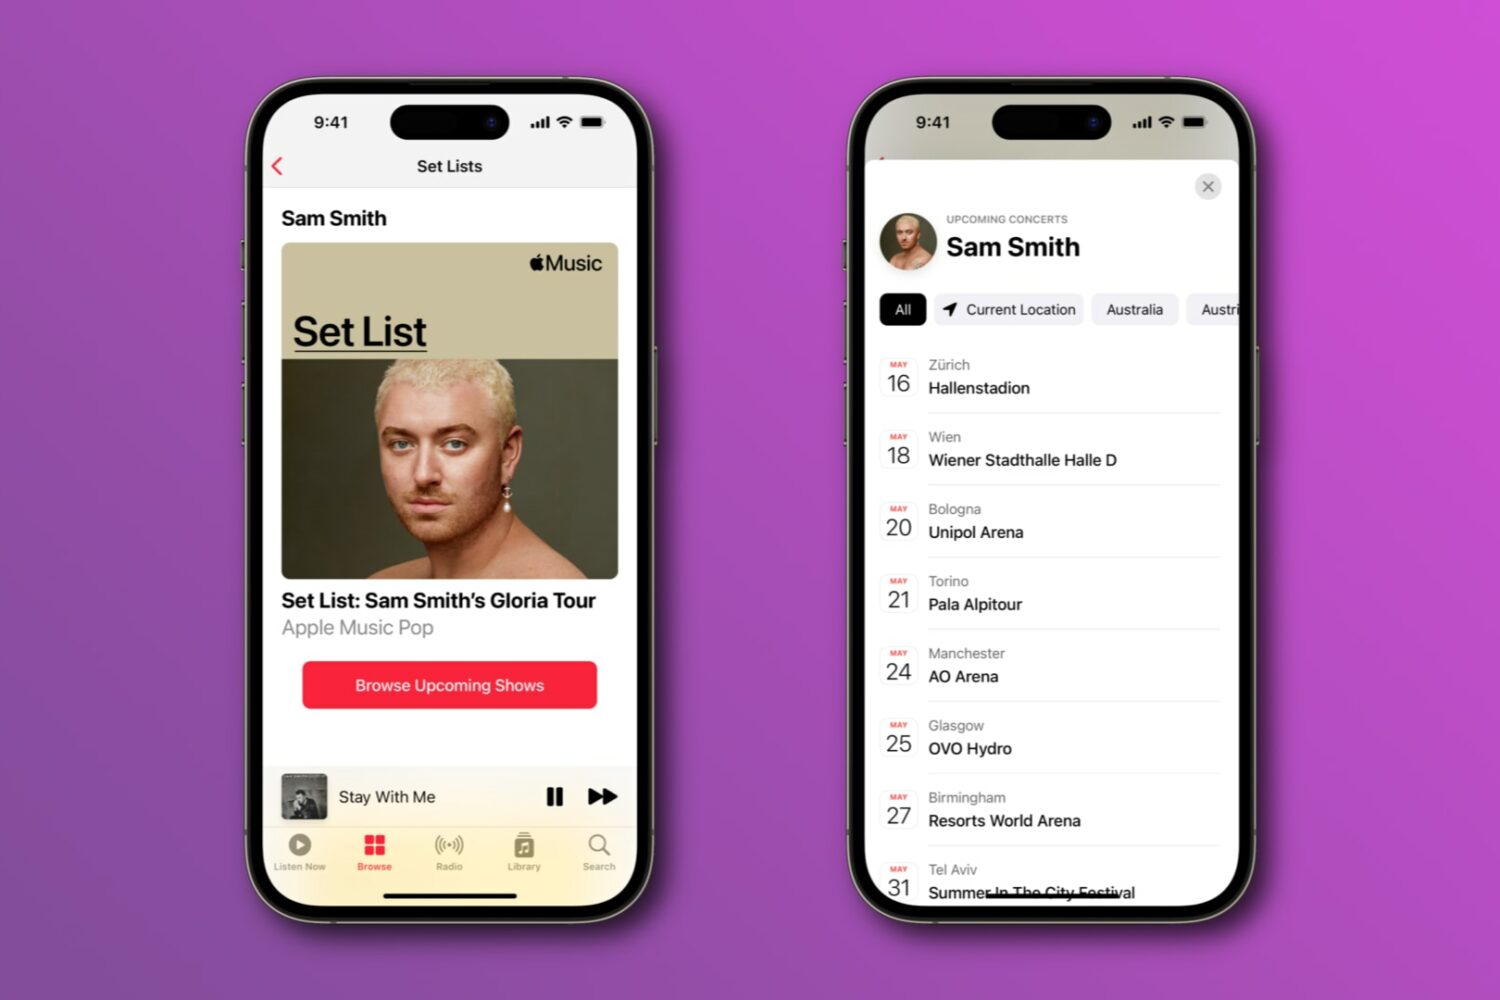 Set list and tour dates for Sam Smith's live concerts in the Music app on iPhone